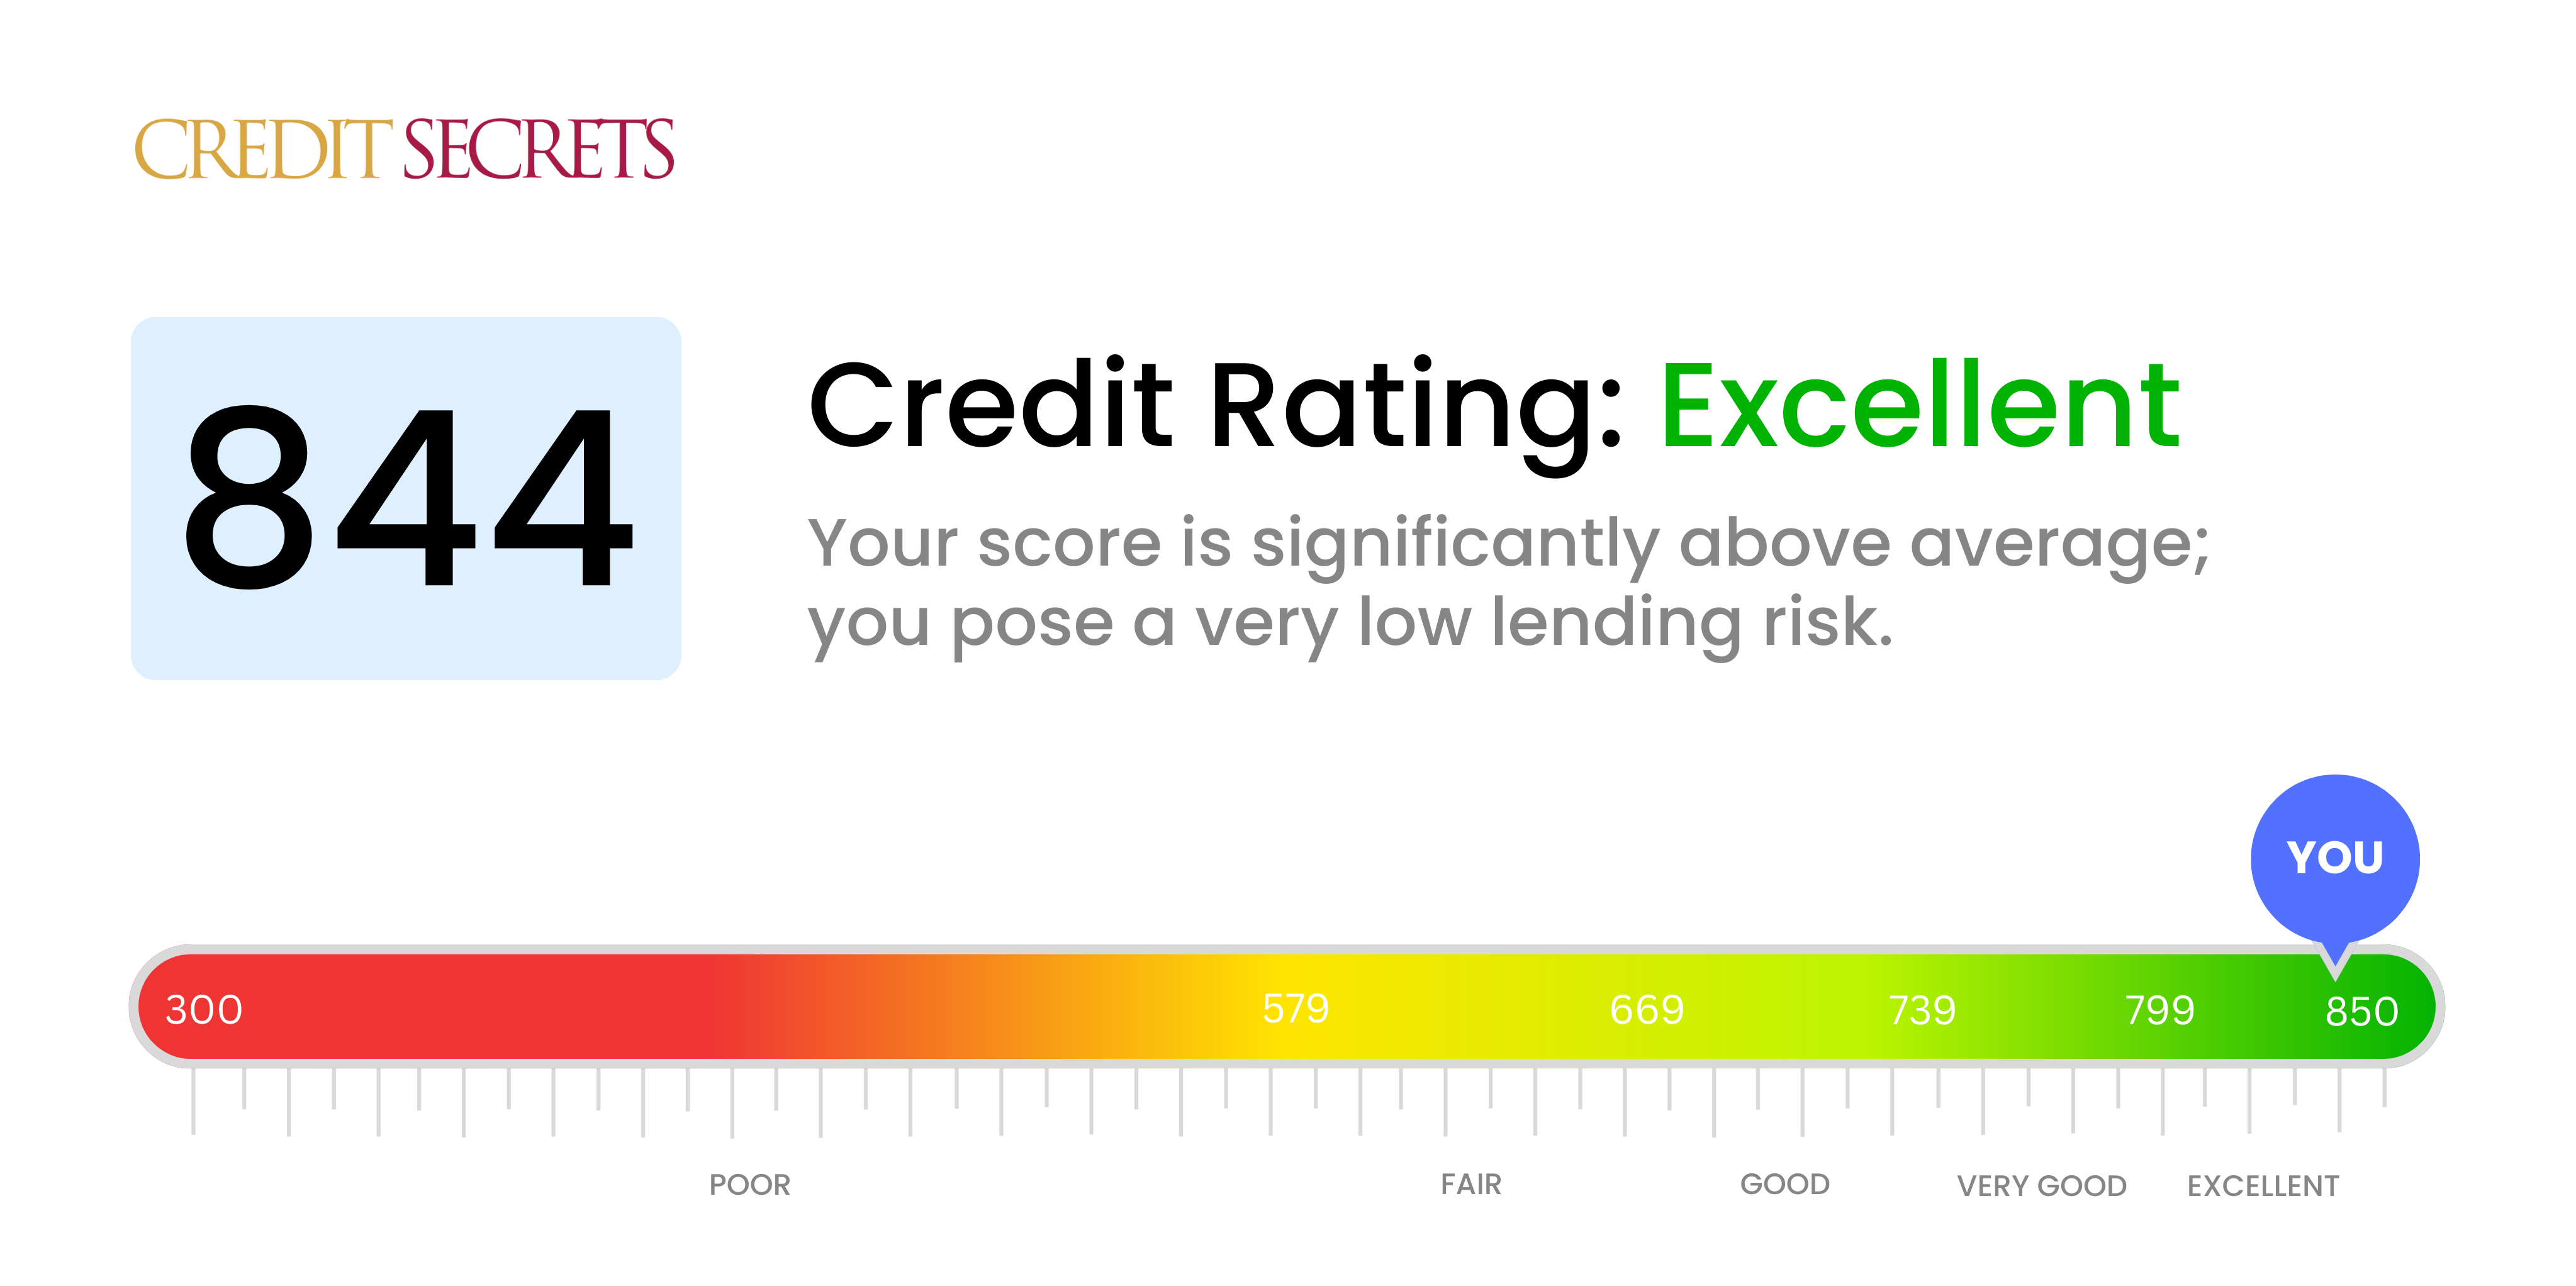 Is 844 a good credit score?